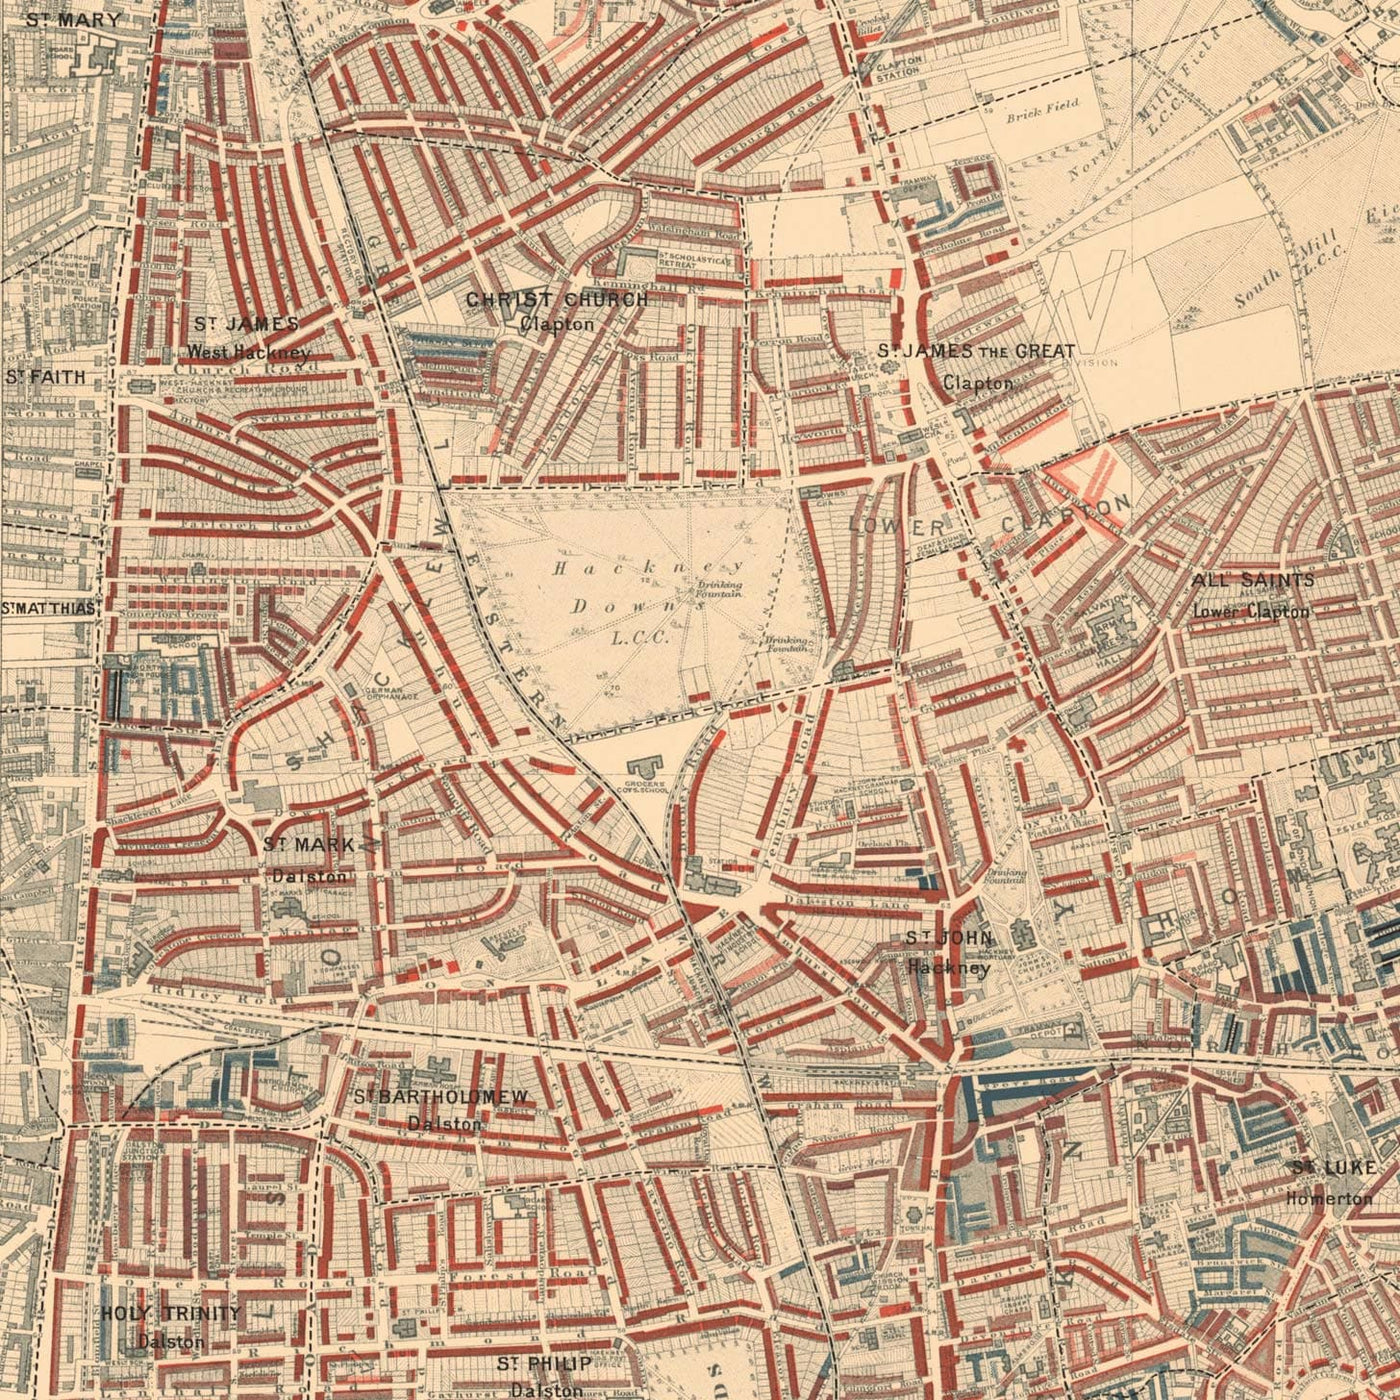 Map of London Poverty 1898-9, North Eastern District, by Charles Booth - Hackney, London Fields, Clapton, Marshes - E5, E8, E9, E3, N16